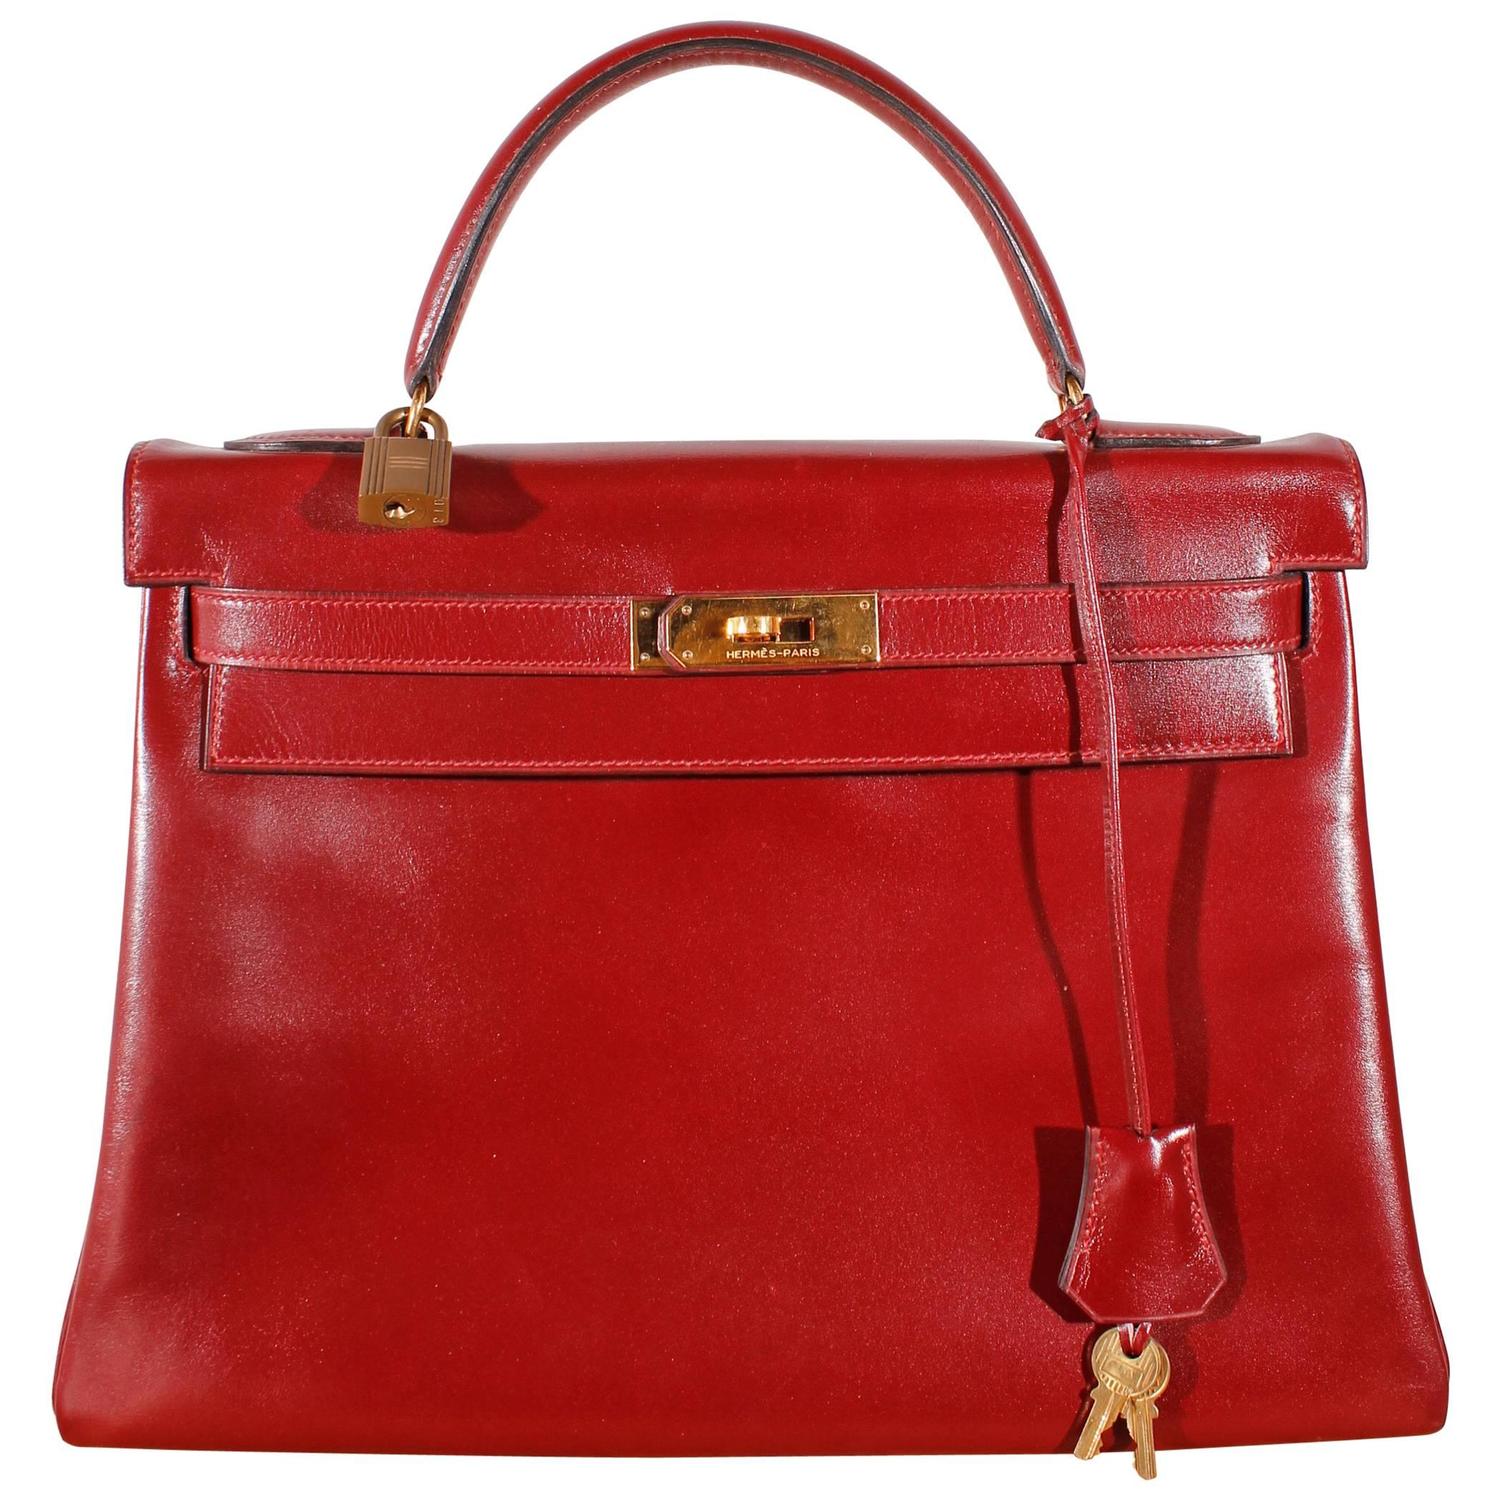 How To Authenticate A Vintage Hermes Kelly Bag | IQS Executive